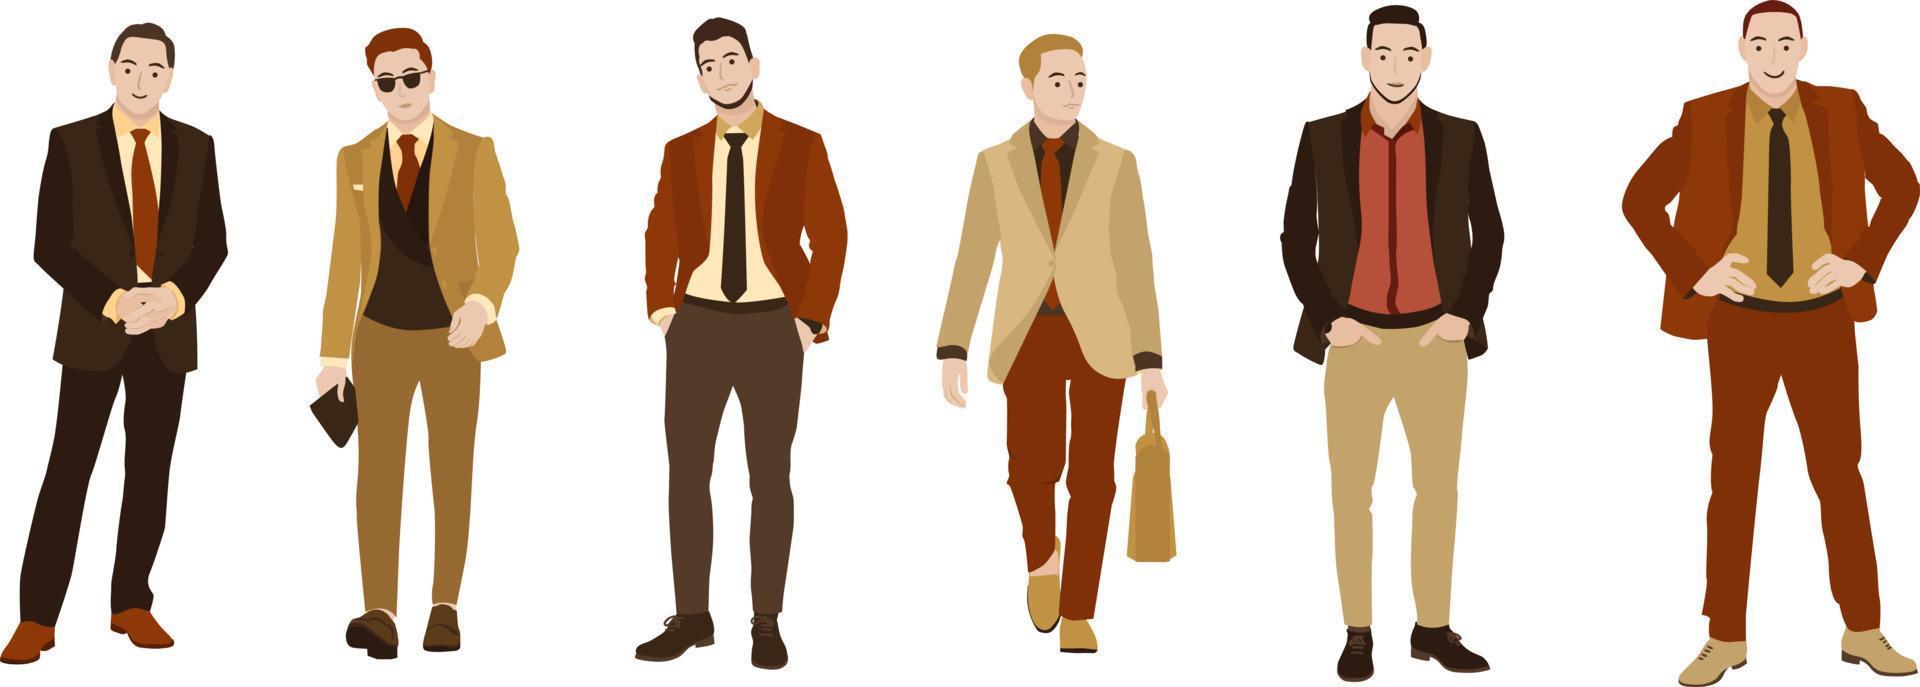 Business Man Graphic Vector